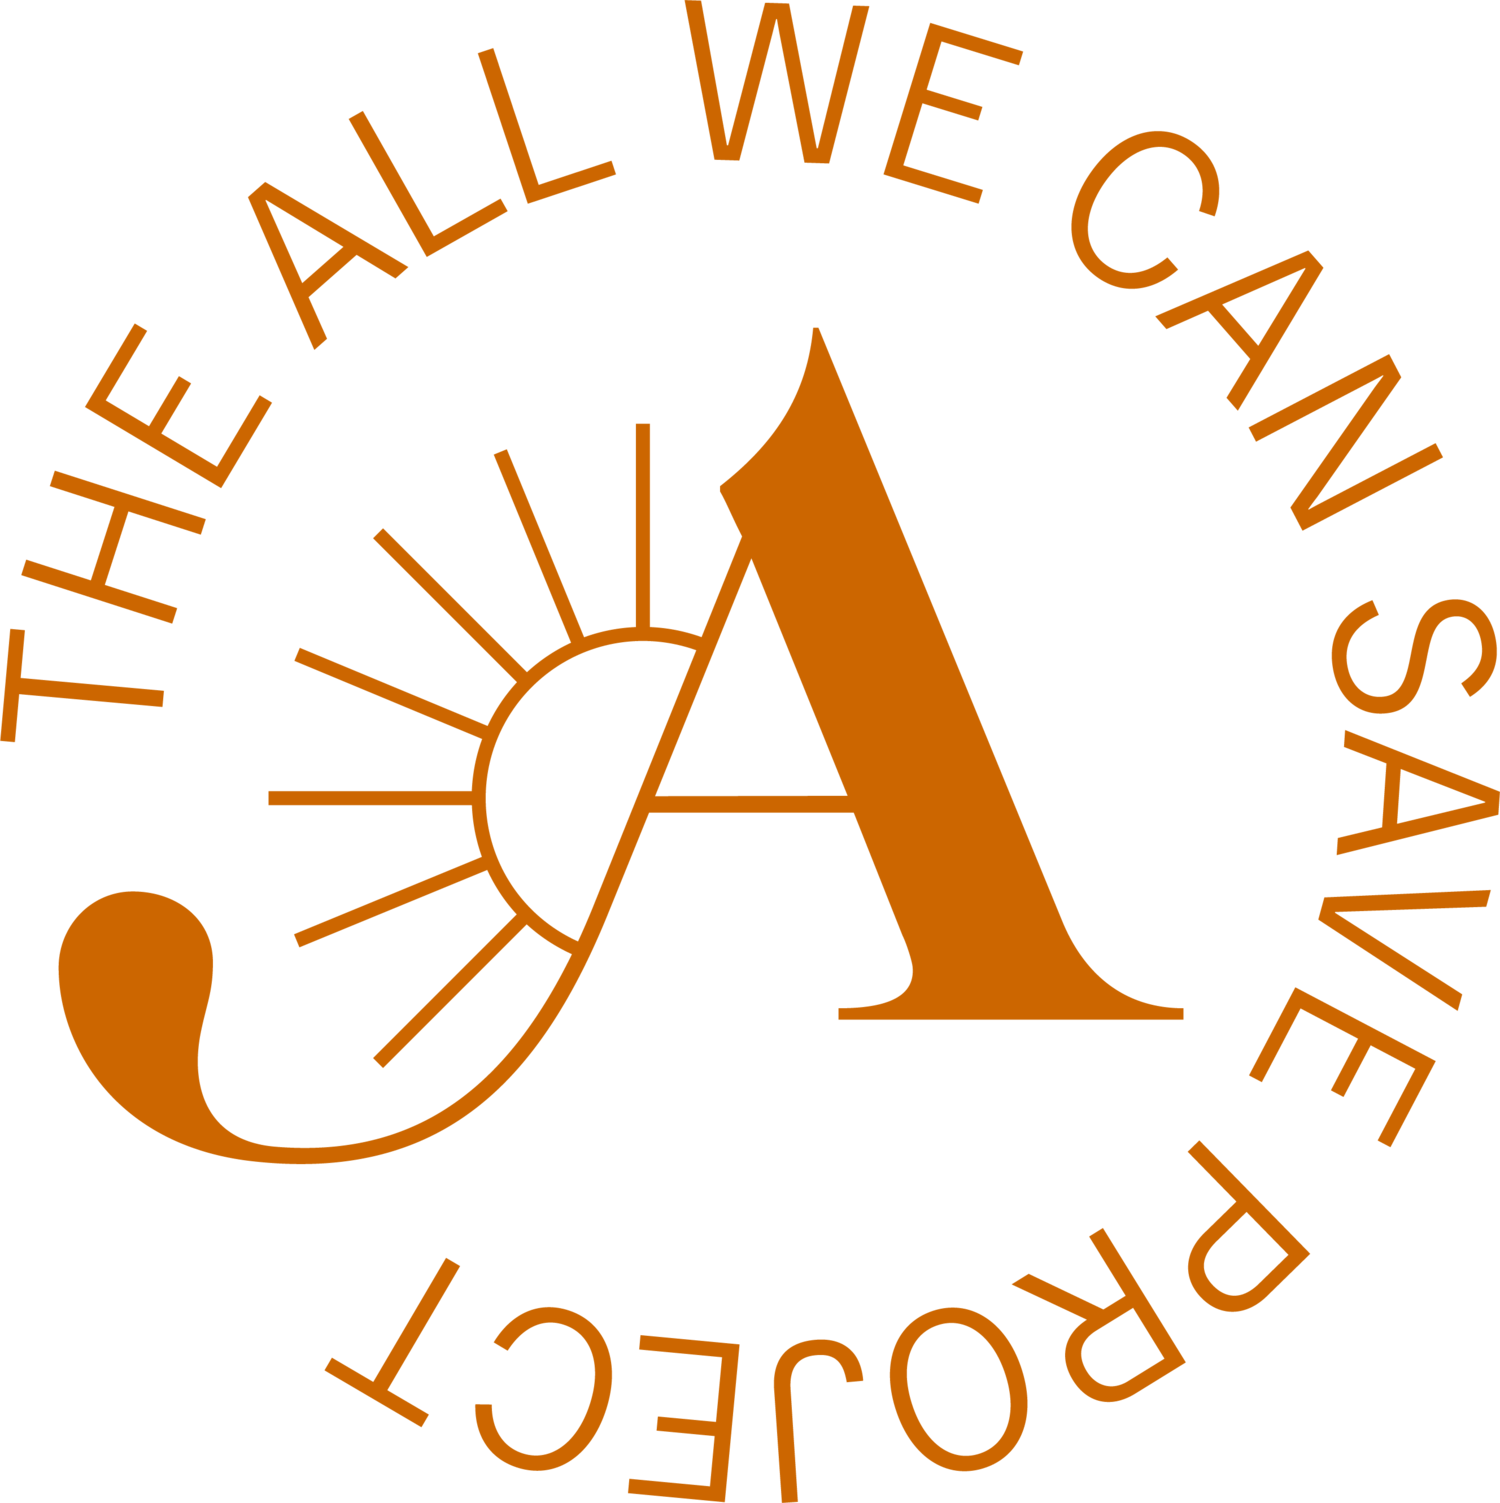 All We Can Save logo